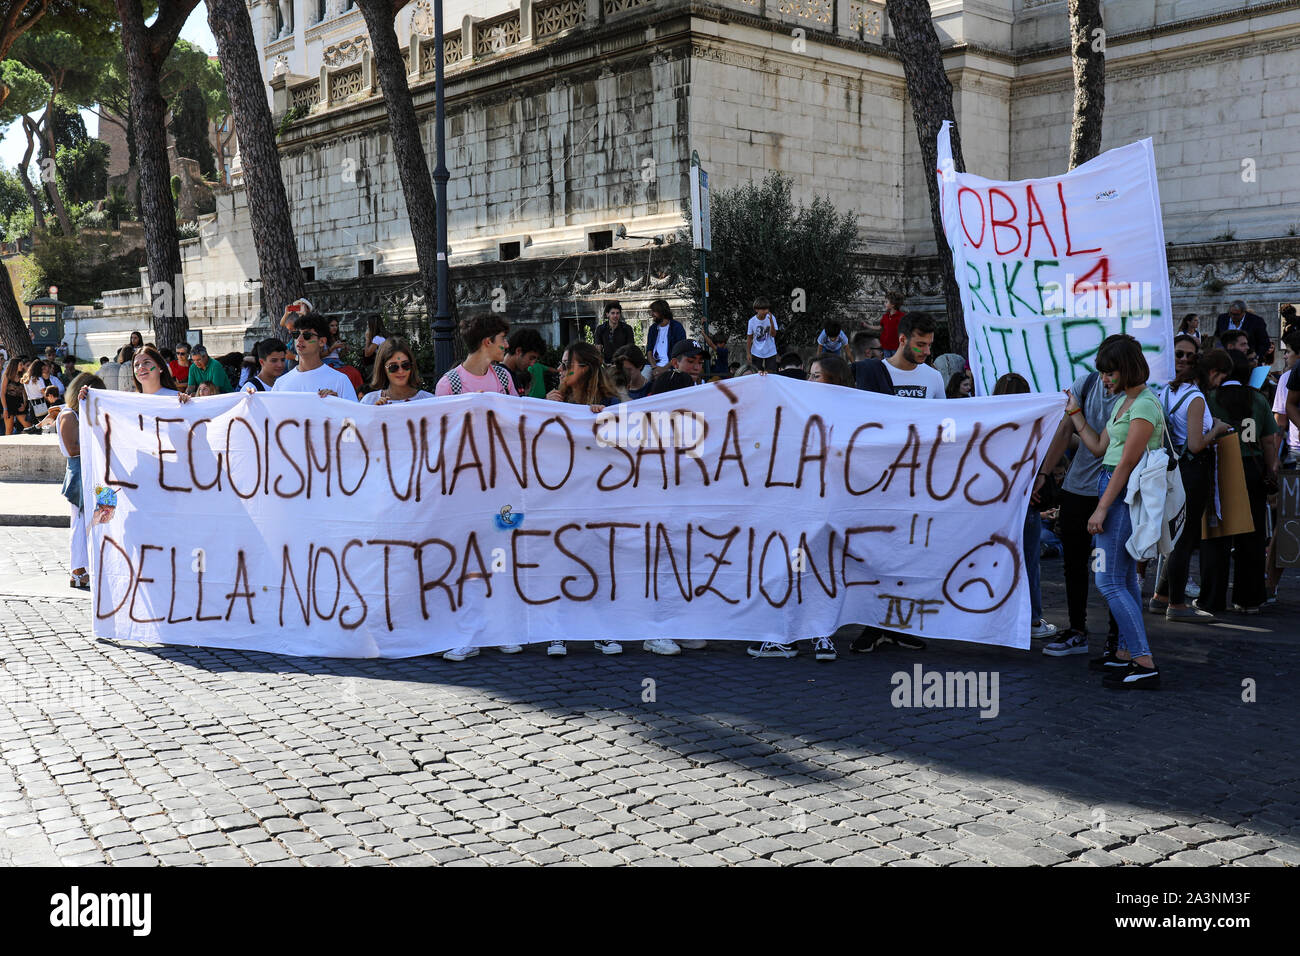 27 Sep 2019. Fridays for future. School strike for climate. Italian students holding a banner in Rome, Italy. Stock Photo